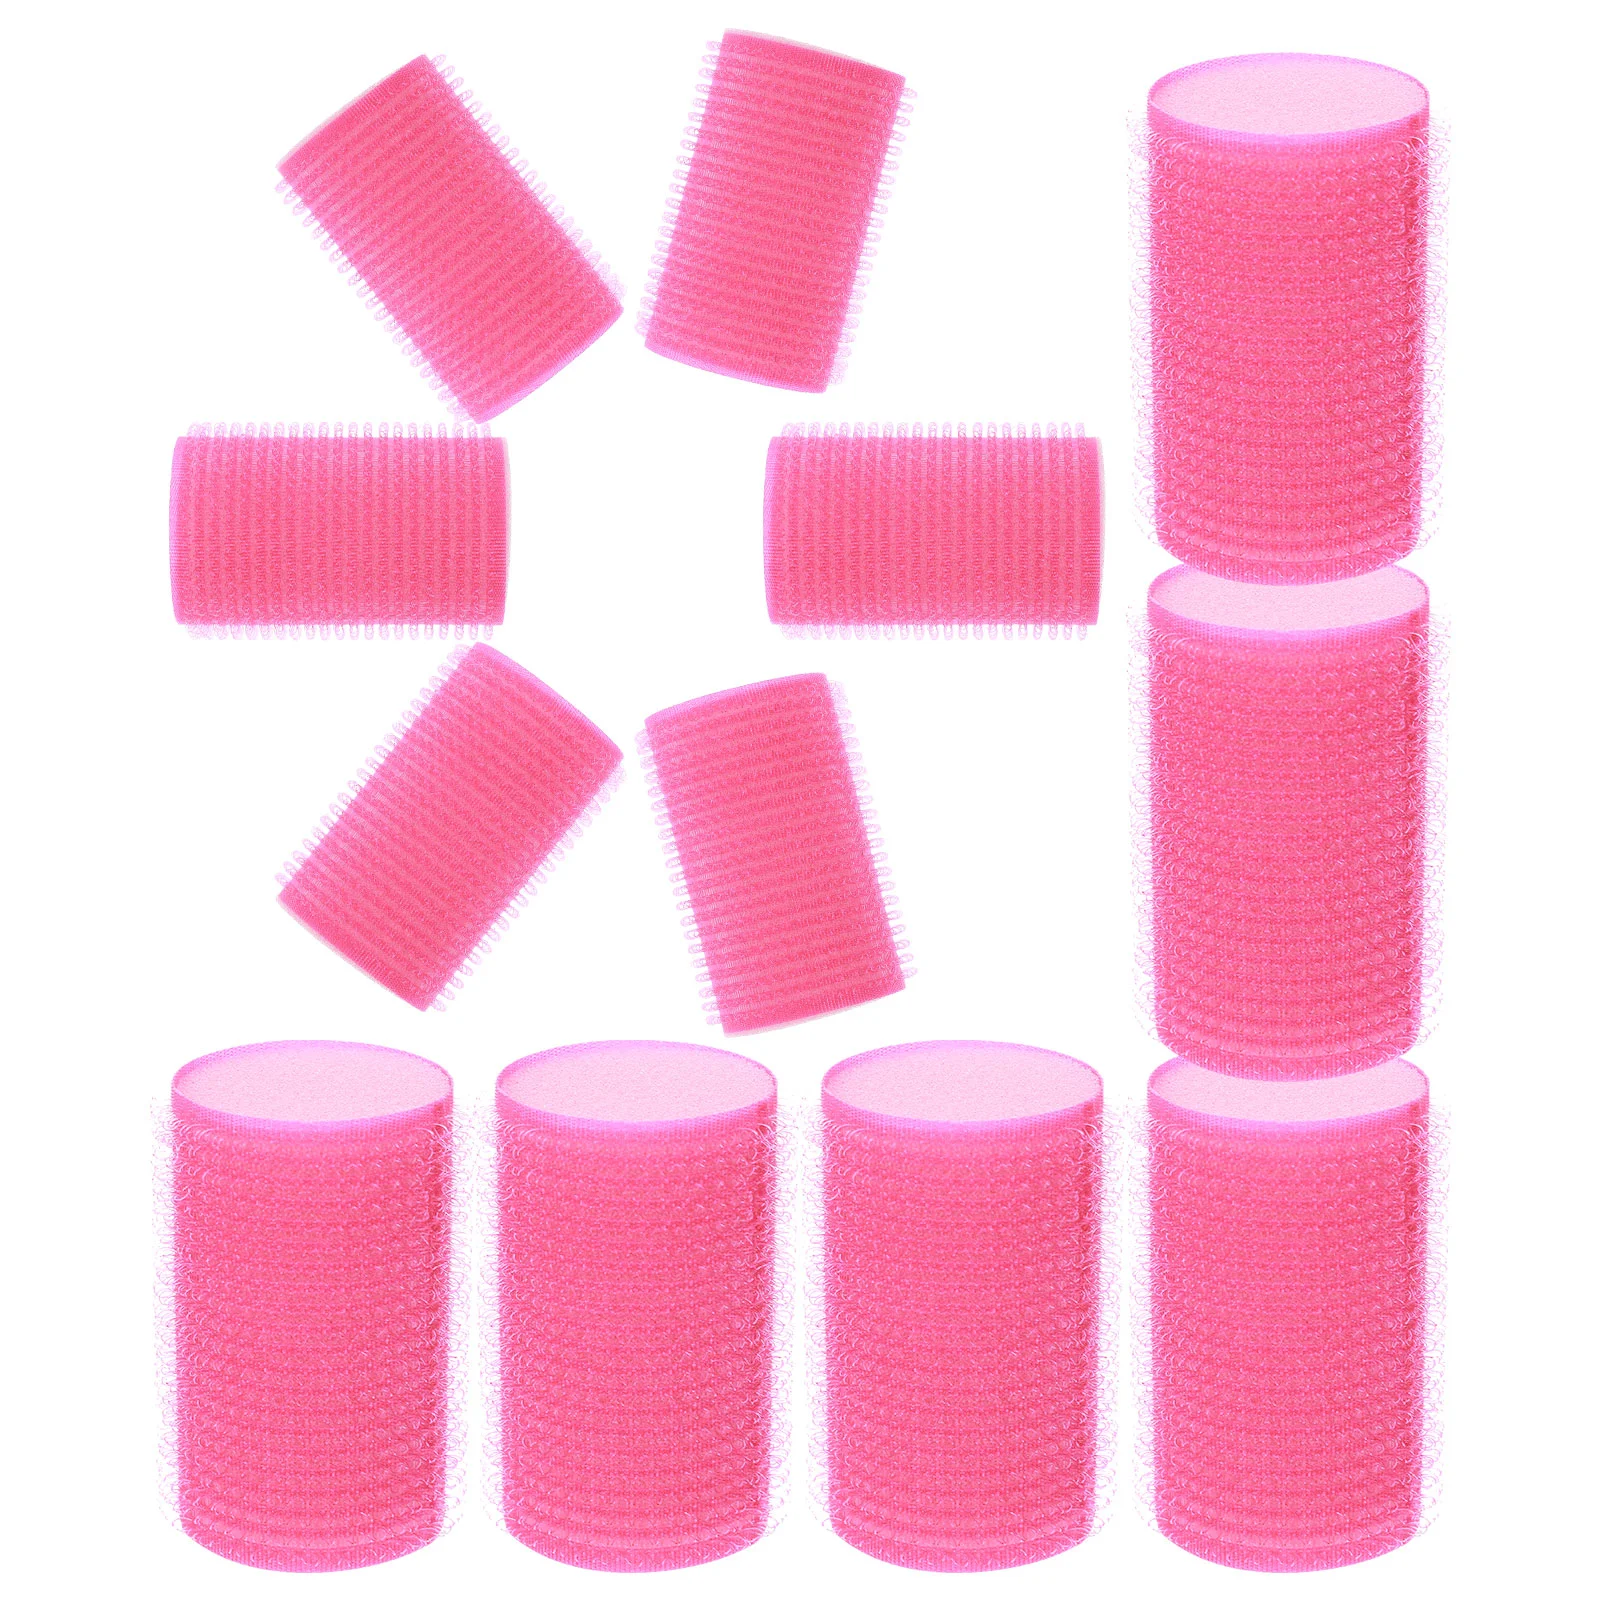 

Hair Rollers Curlers Roller Sponge Curler Bangs Foam Styling Self Clips Rods Perm Grip Curtain Hairdressing Soft Curling Tools